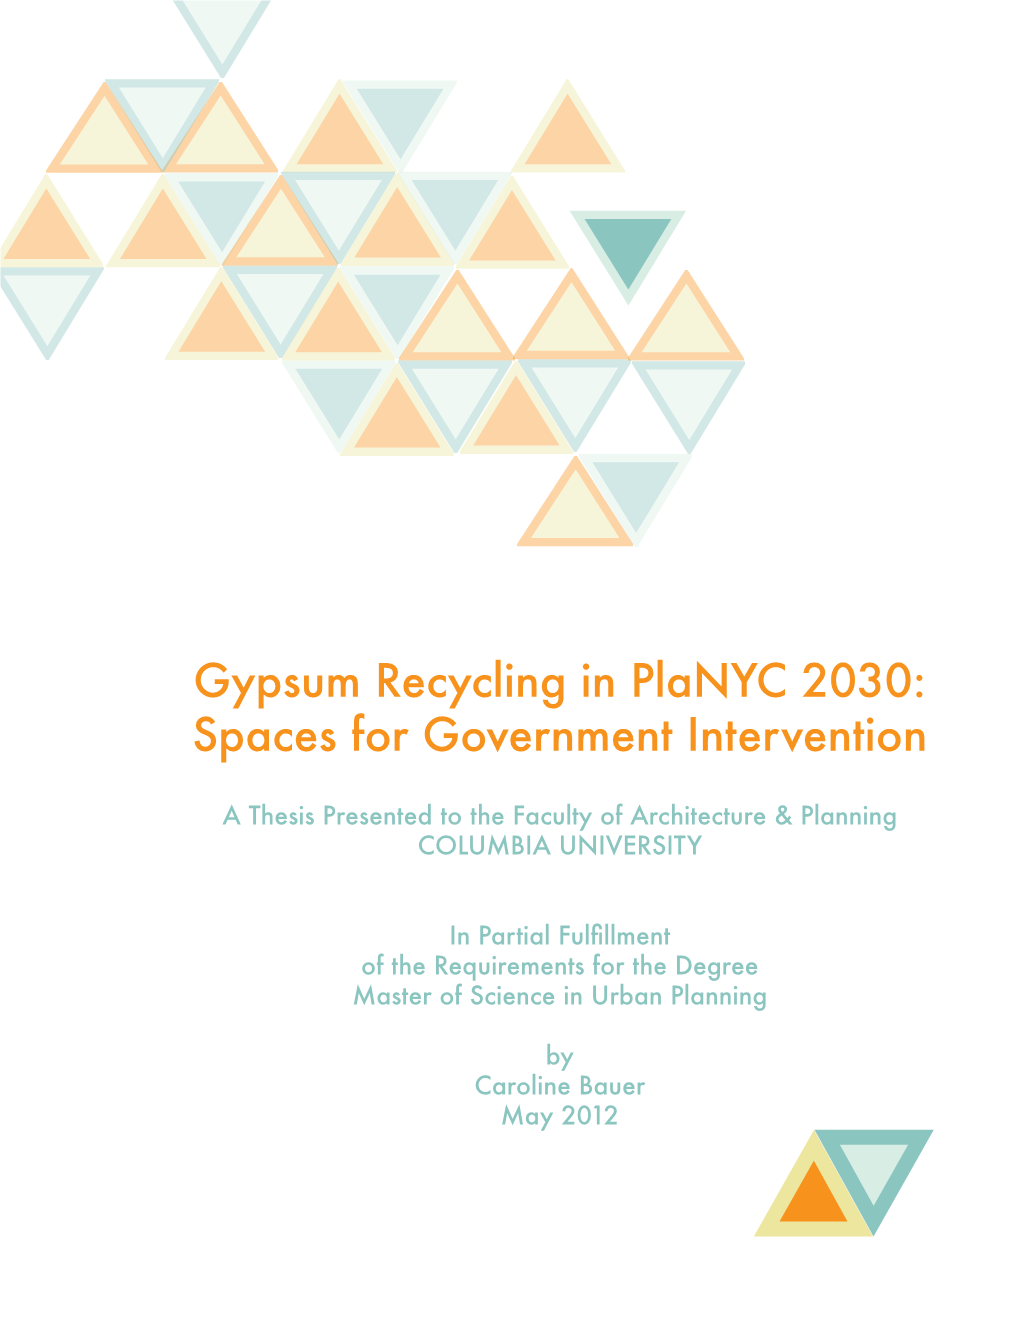 Gypsum Recycling in Planyc 2030: Spaces for Government Intervention